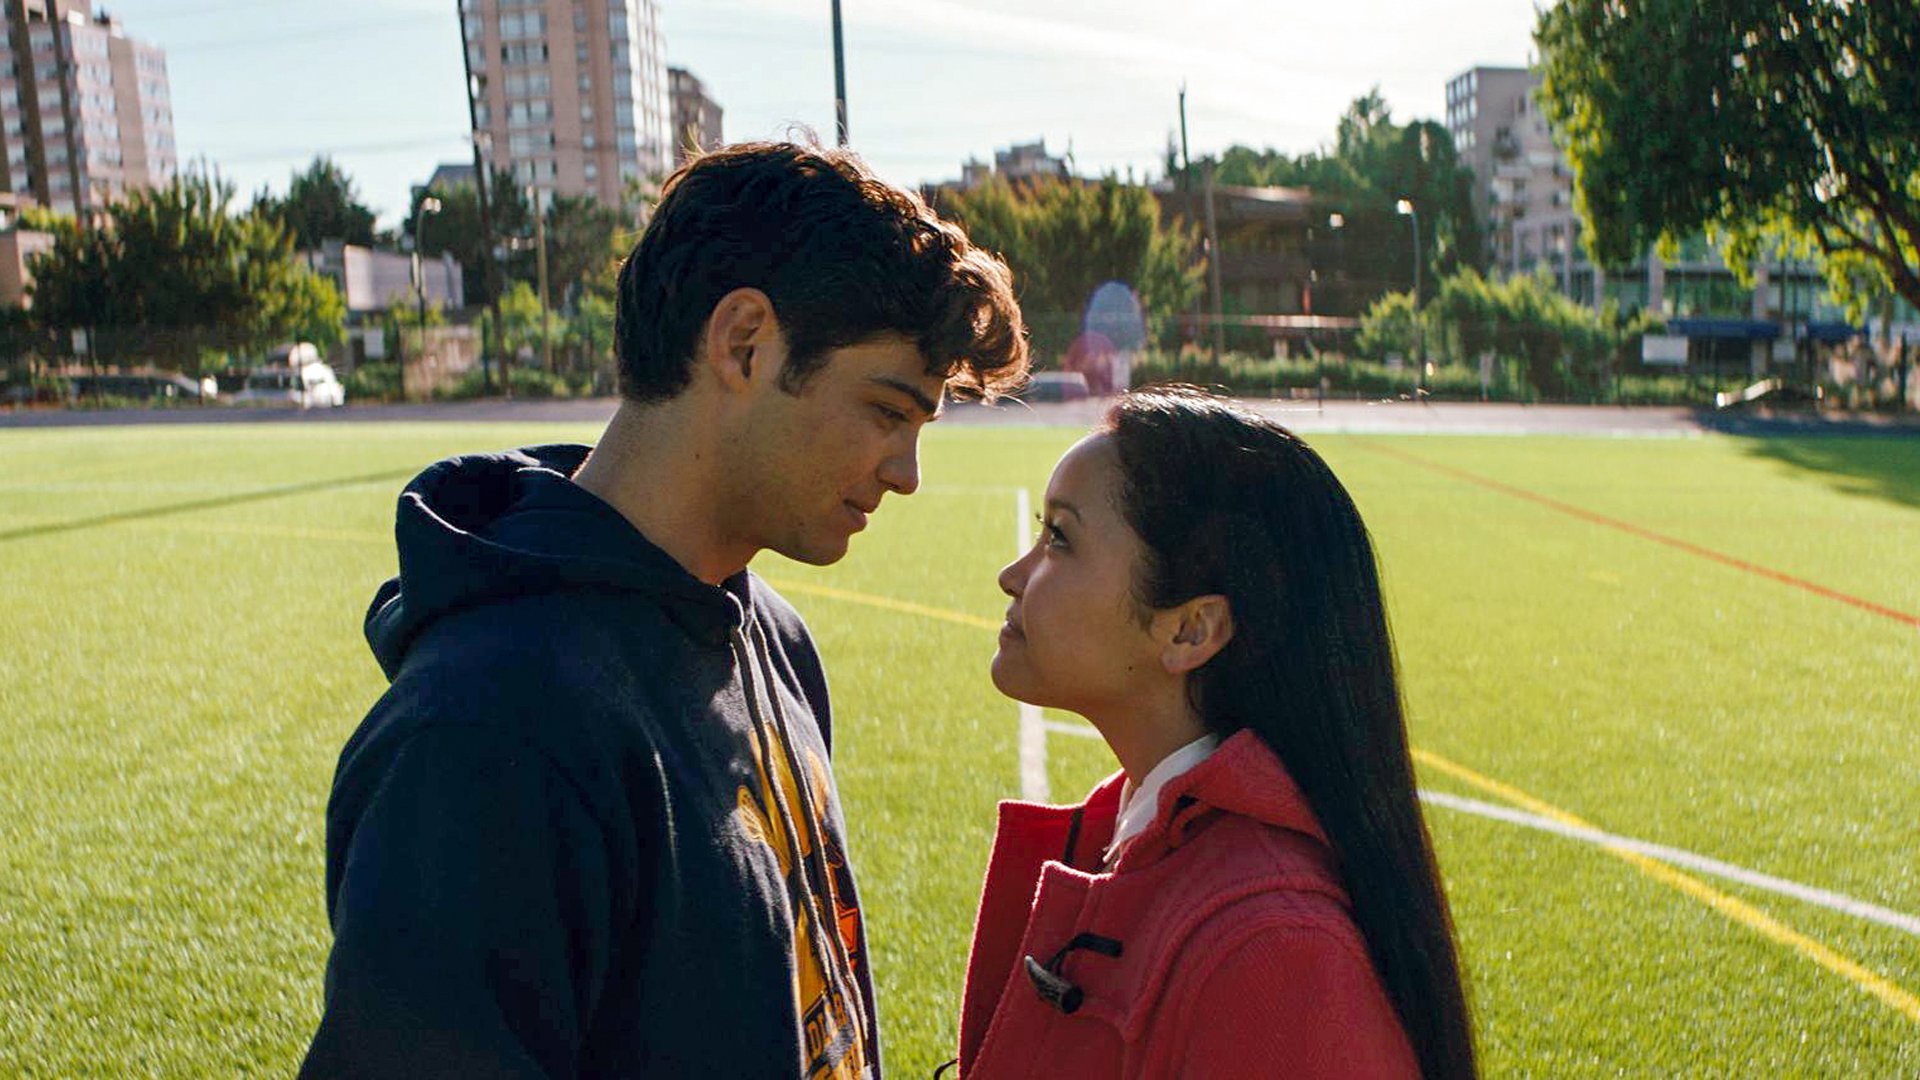 Noah Centineo as Peter Kavinsky and Lana Condor as Lara Jean Covey almost kissing at the lacrosse field on 'To All the Boys I've Loved Before'